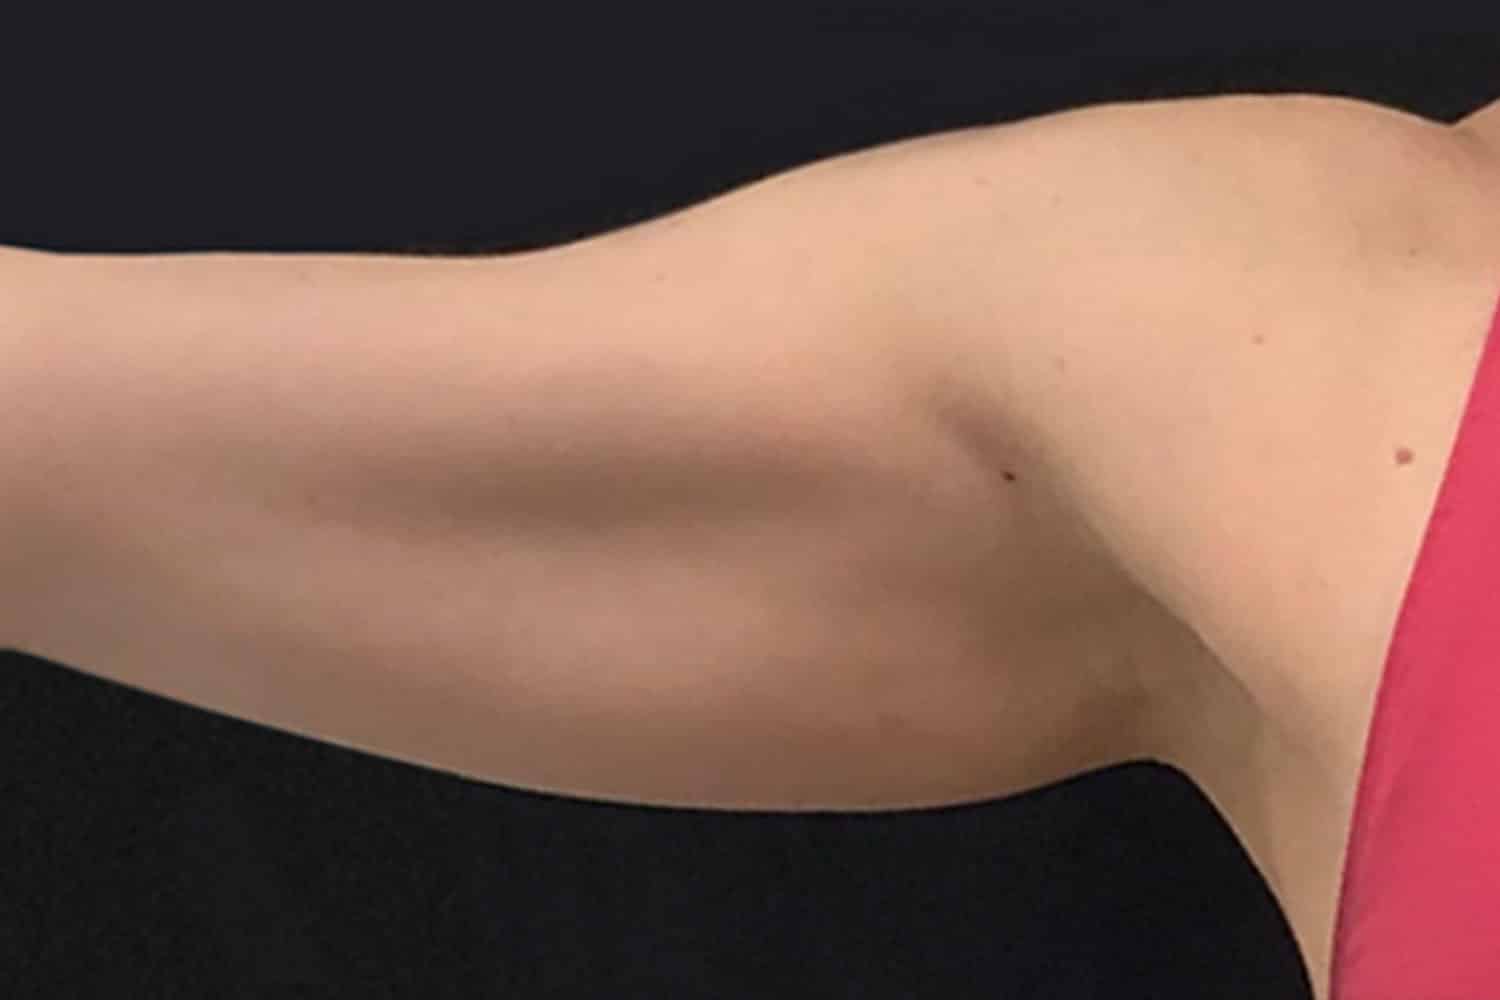 right arm with excess skin after Trusculpt procedure at Regeneris